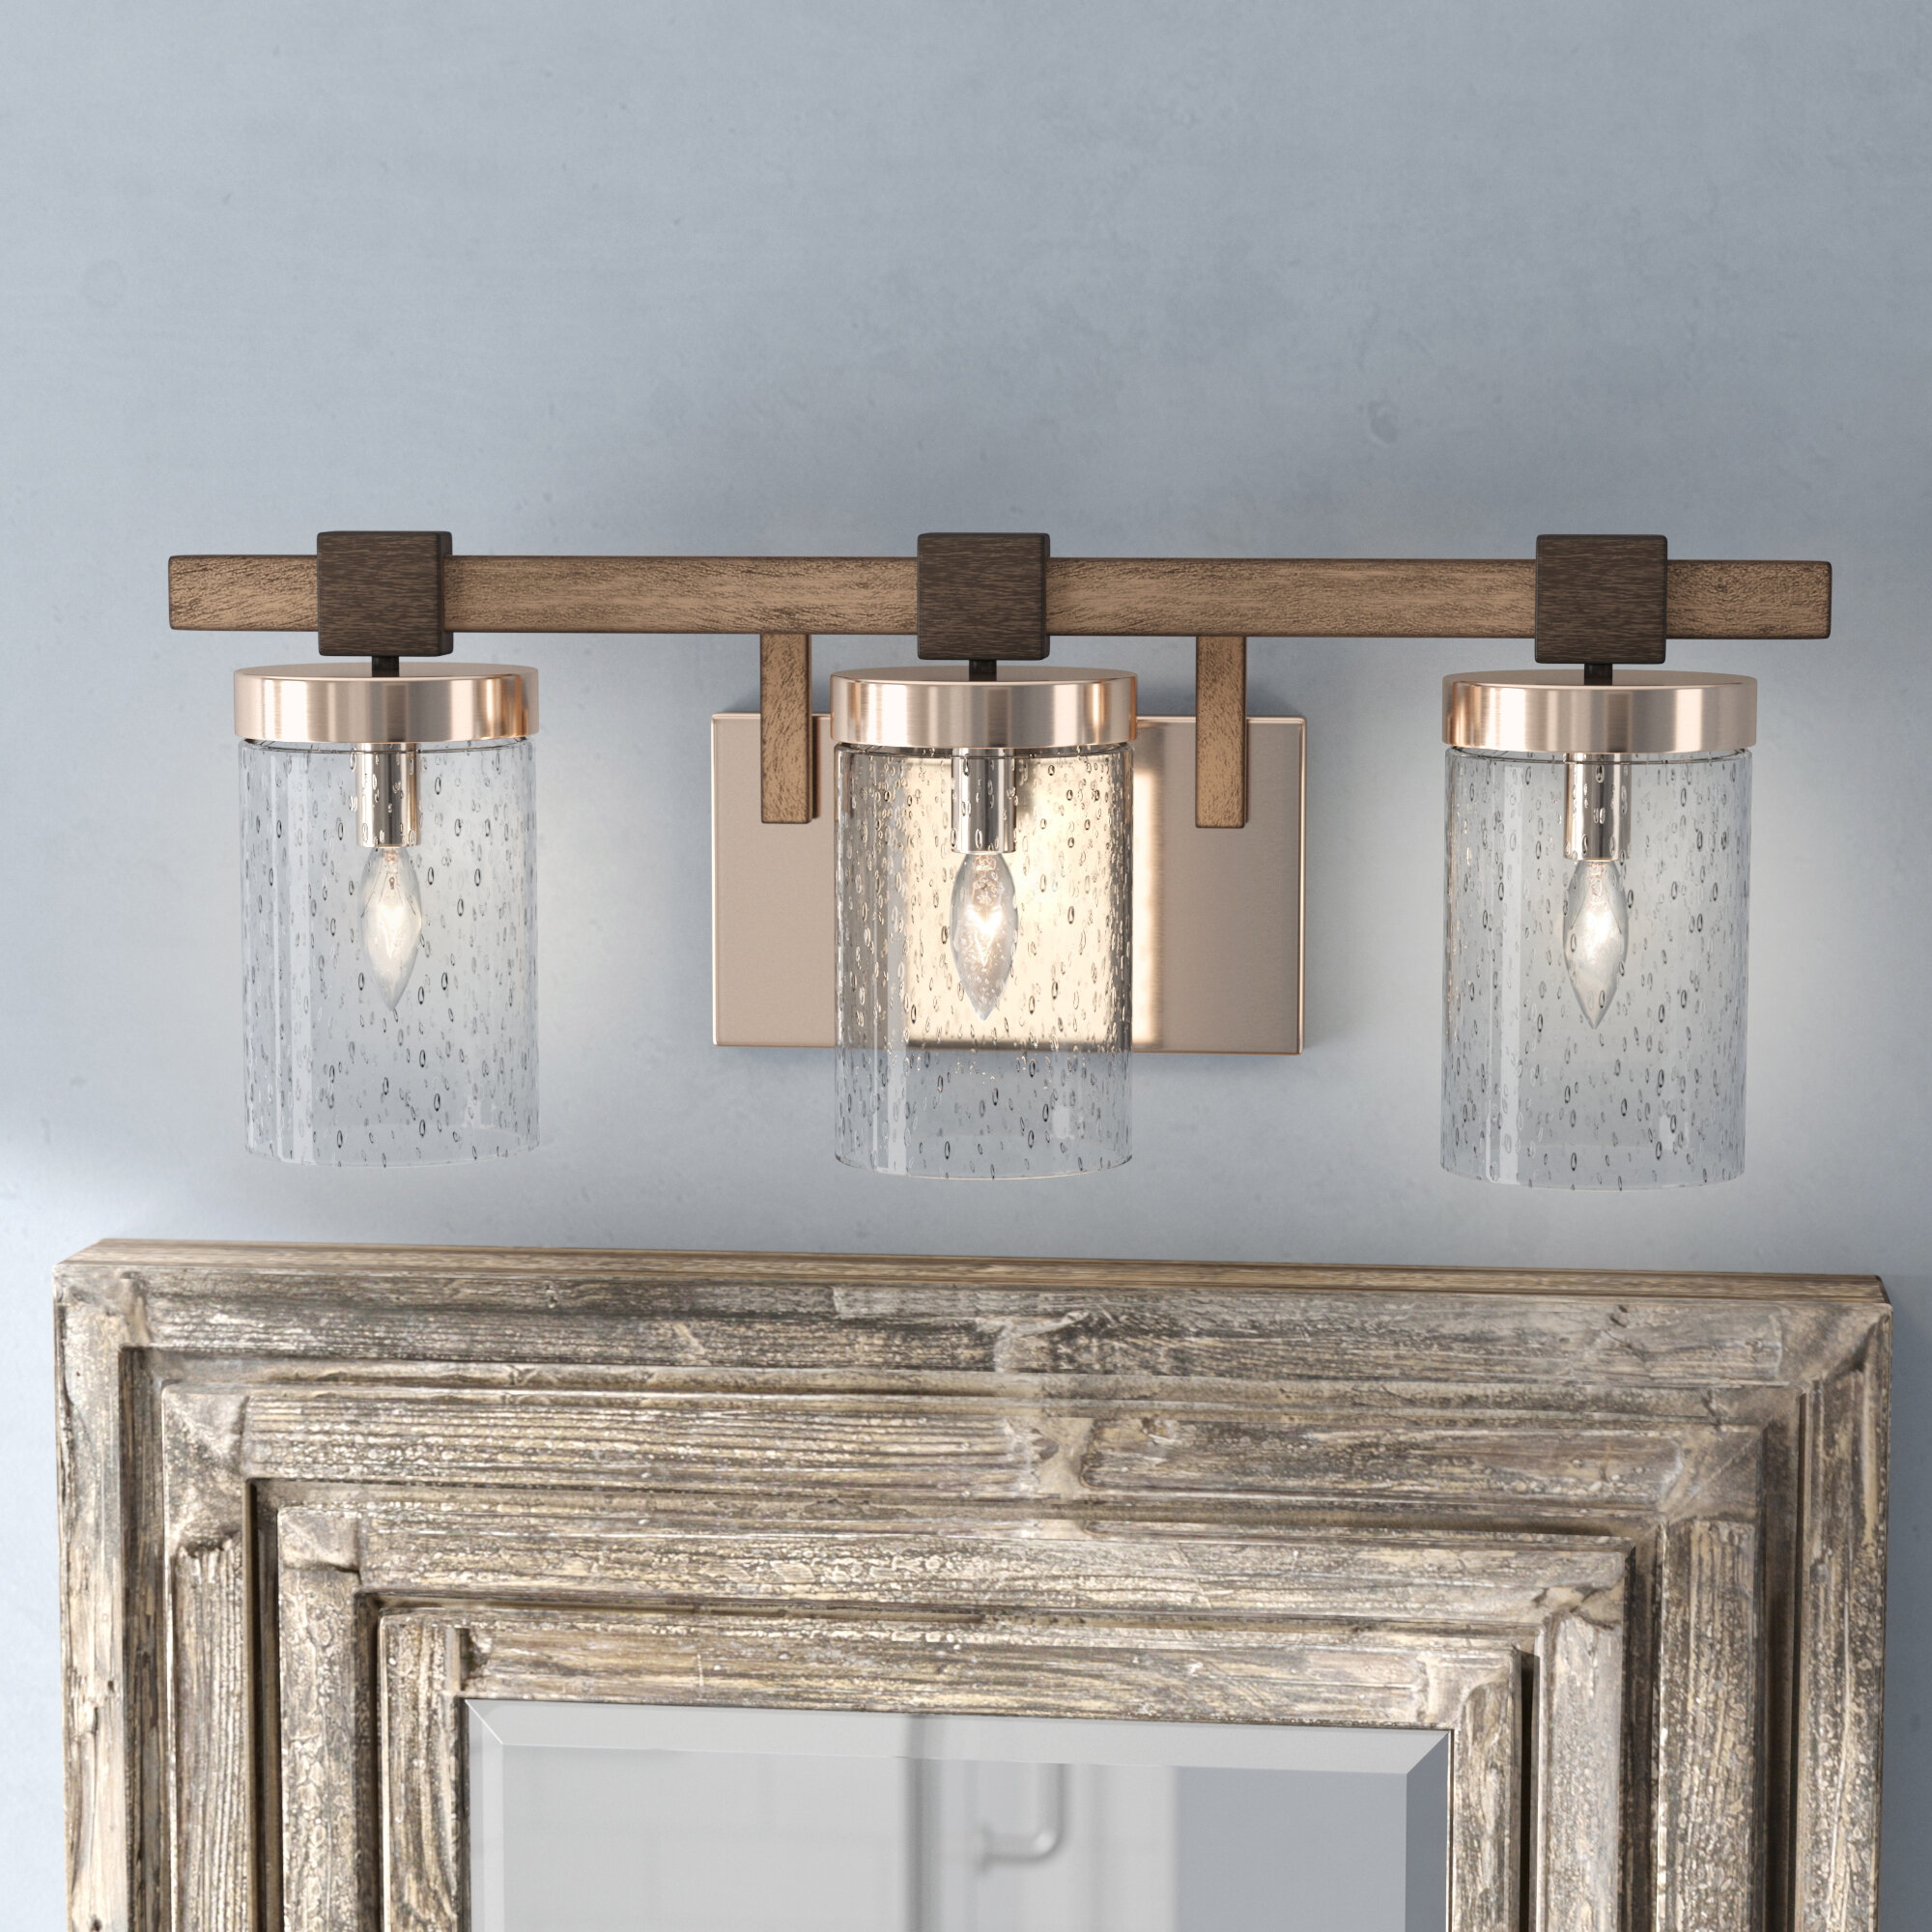 Union Rustic Lipsey 3 Light Dimmable Stone Grey Brushed Nickel Vanity Light Reviews Wayfair